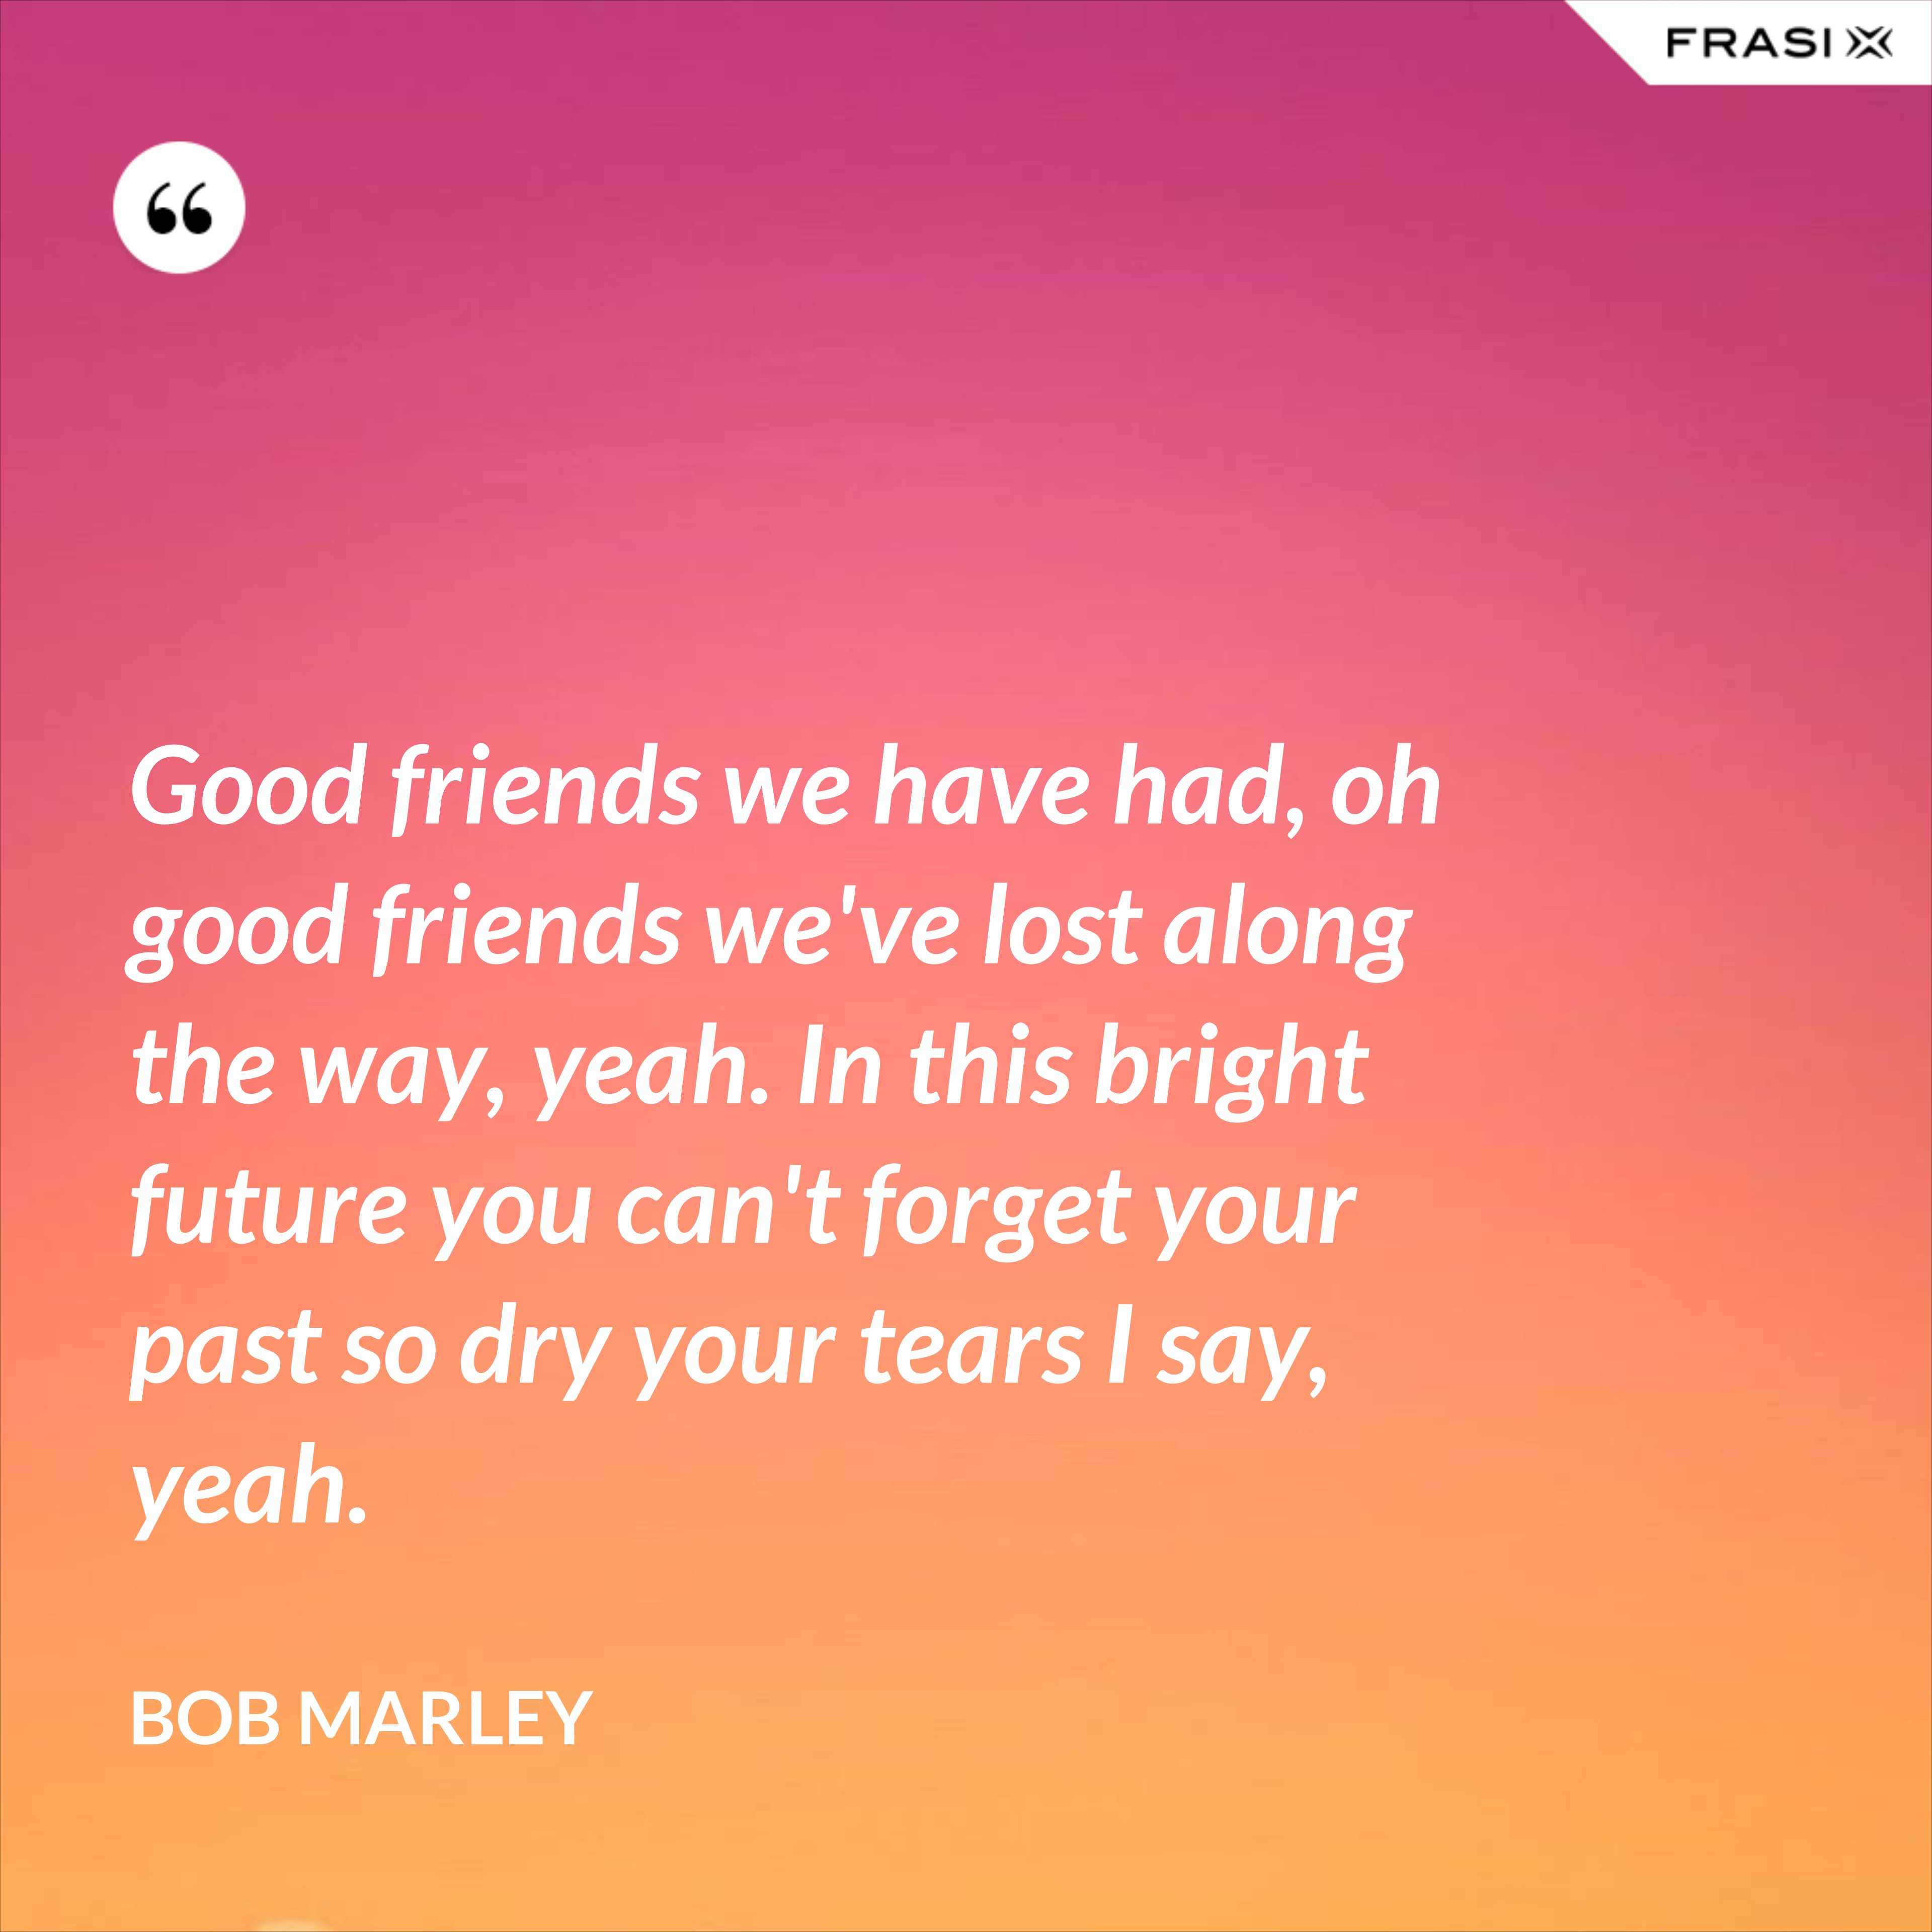 Good friends we have had, oh good friends we've lost along the way, yeah. In this bright future you can't forget your past so dry your tears I say, yeah. - Bob Marley